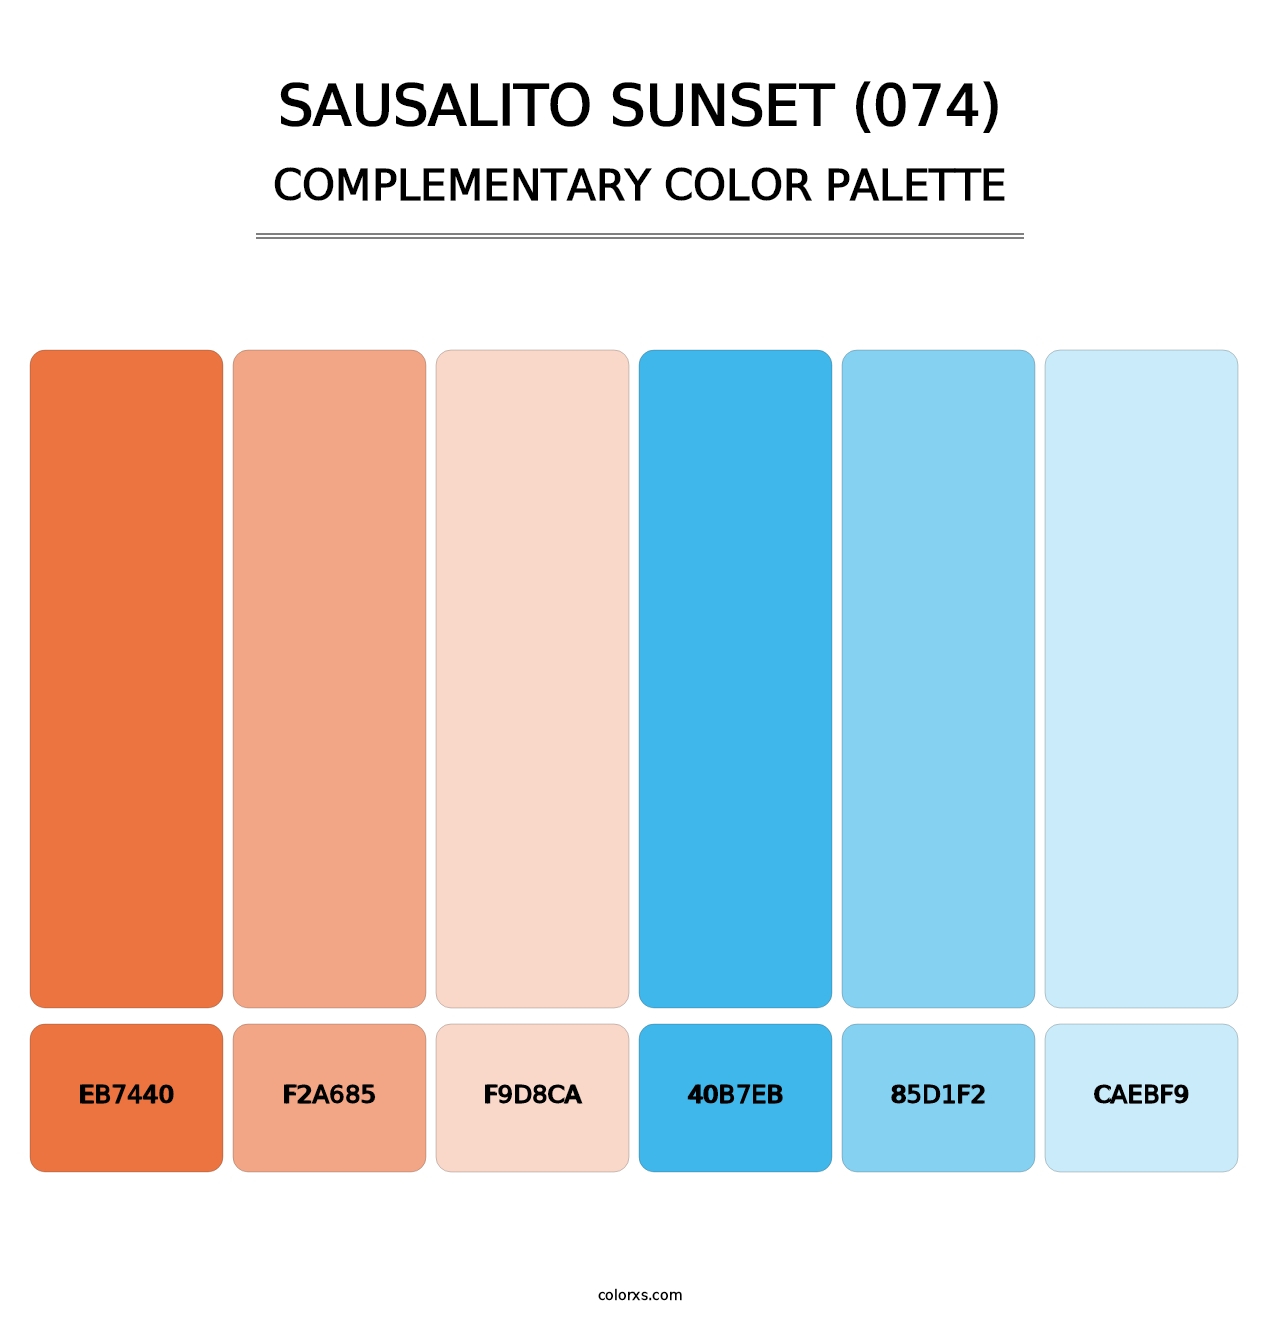 Sausalito Sunset (074) - Complementary Color Palette